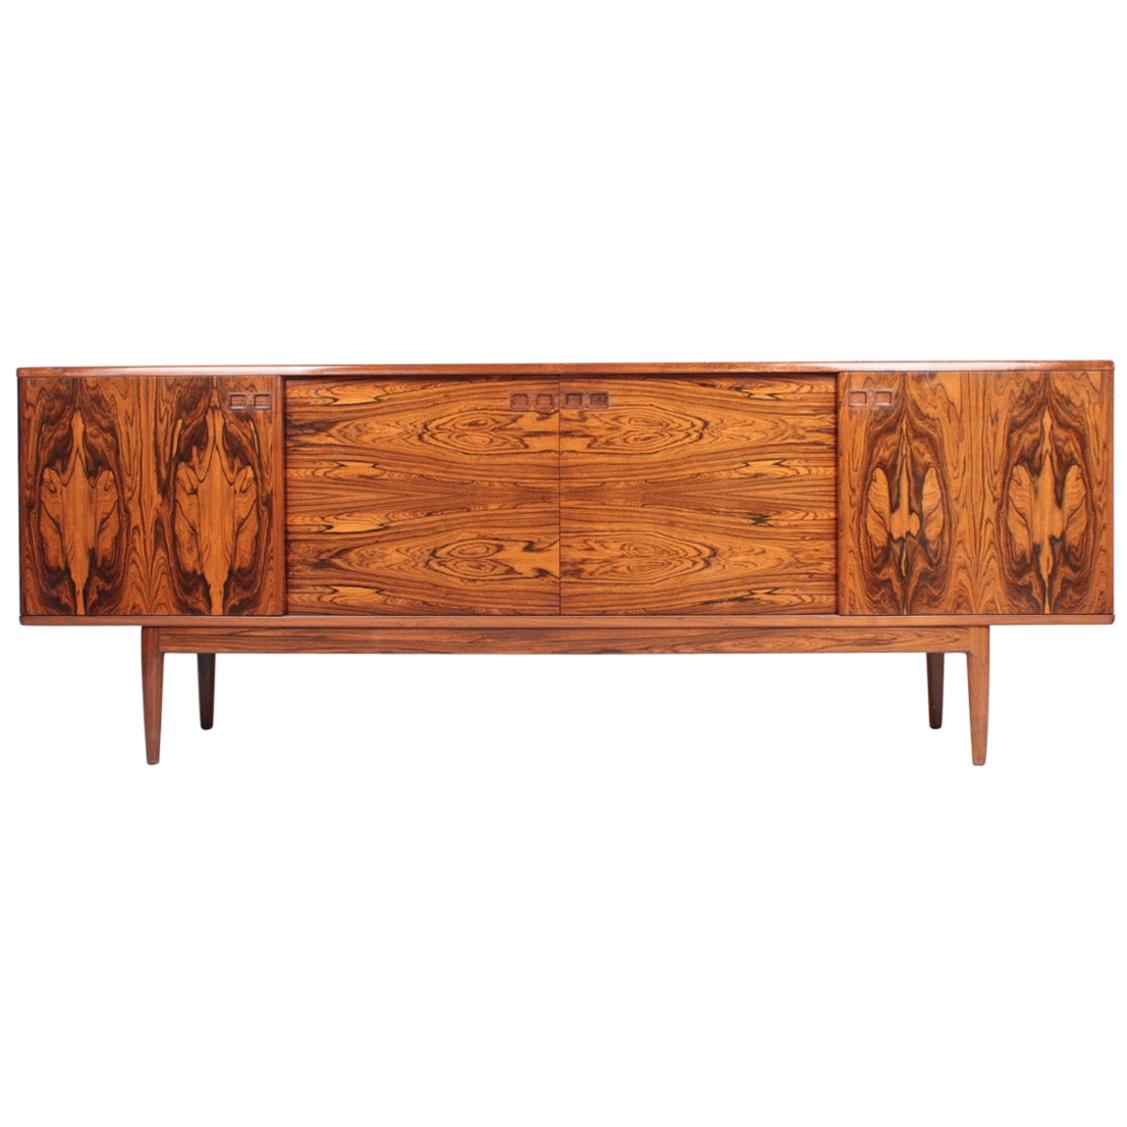 Danish Midcentury Sideboard in Rosewood Designed by Christian Linneberg, 1960s For Sale